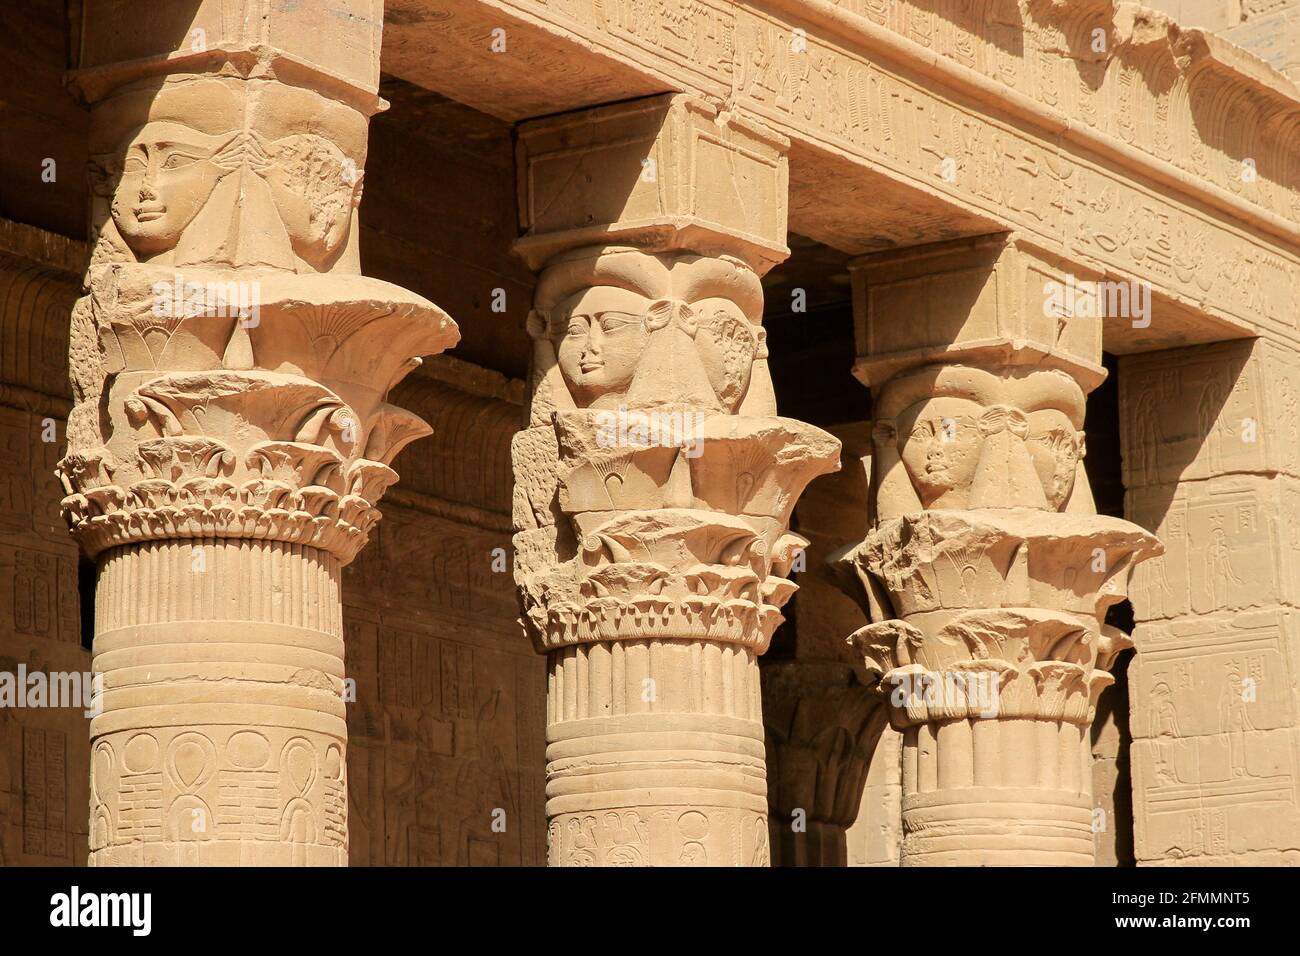 Carved heads on columns at Temple of Philae, Agilkia Island in Lake Nasser, Egypt Stock Photo